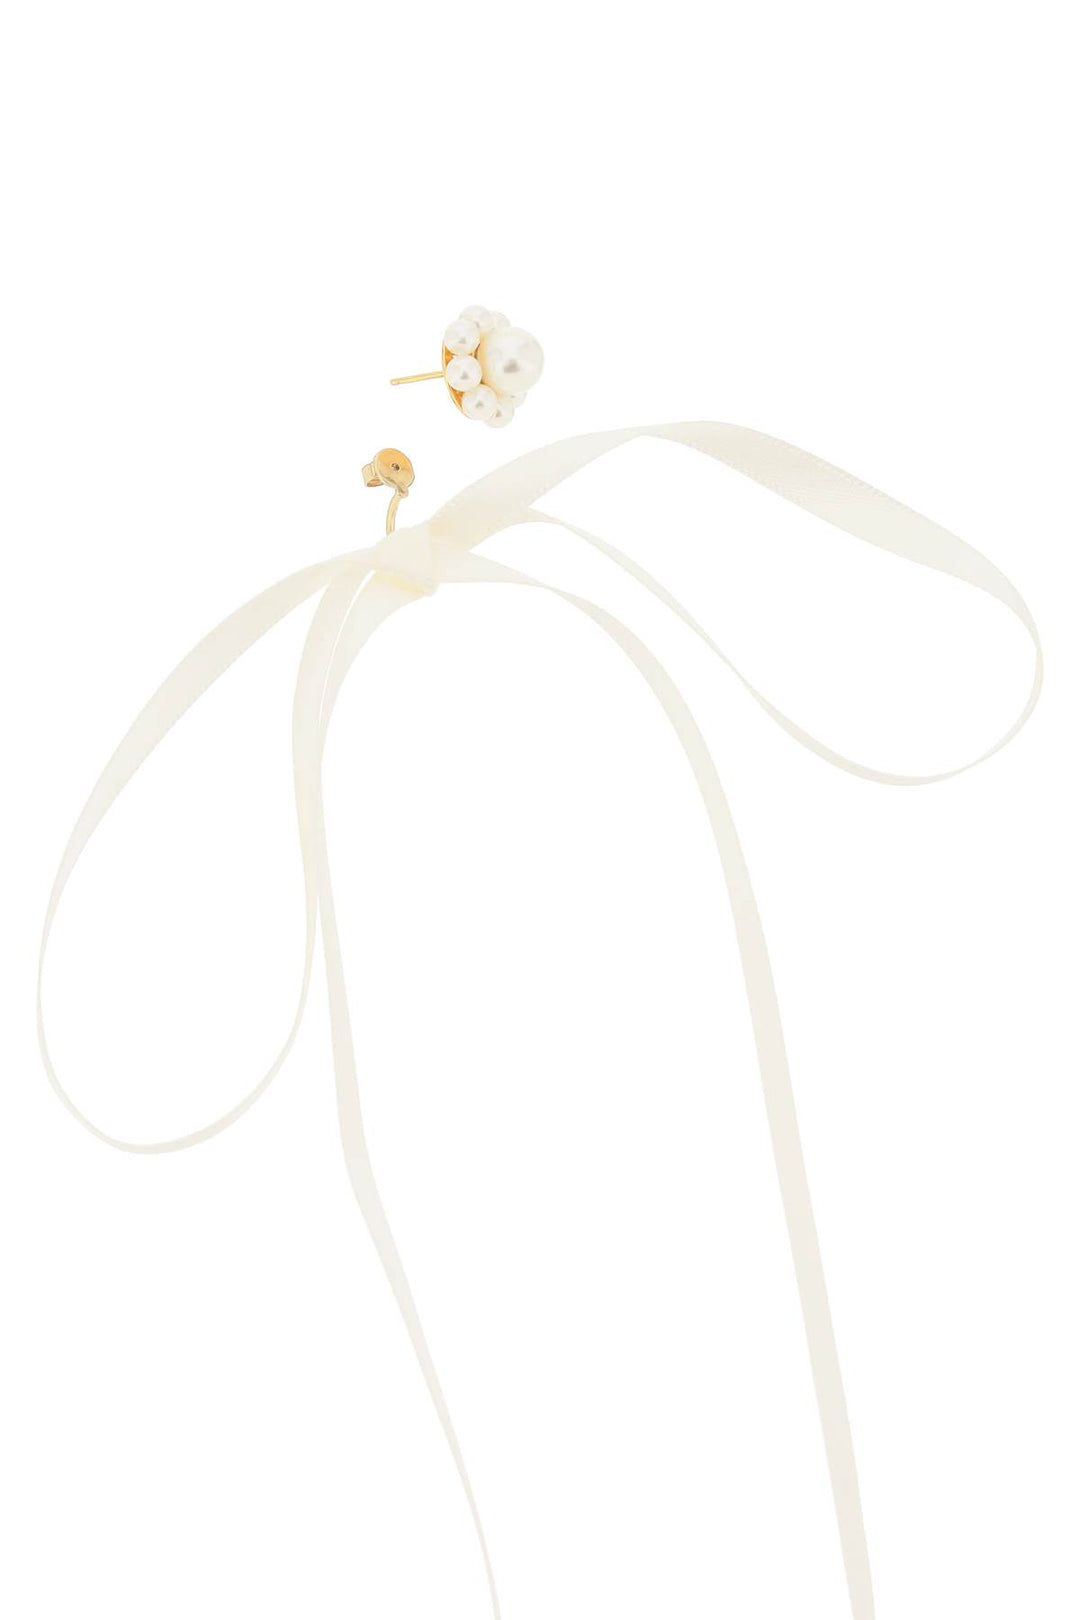 Simone Rocha Button Pearl Earrings With Bow Detail.   Bianco